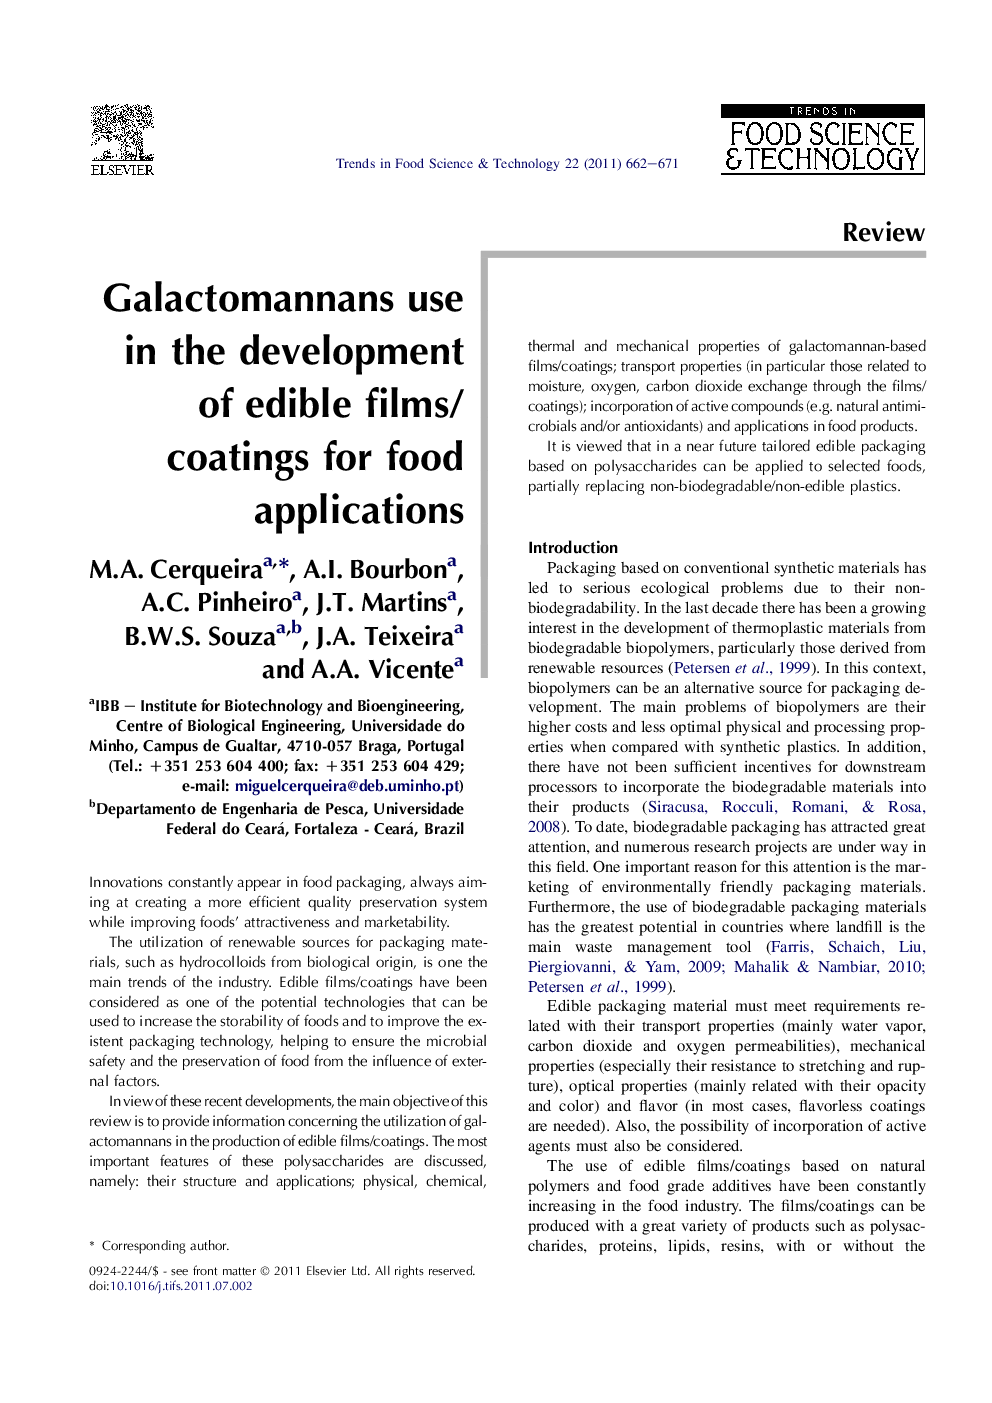 Galactomannans use in the development of edible films/coatings for food applications